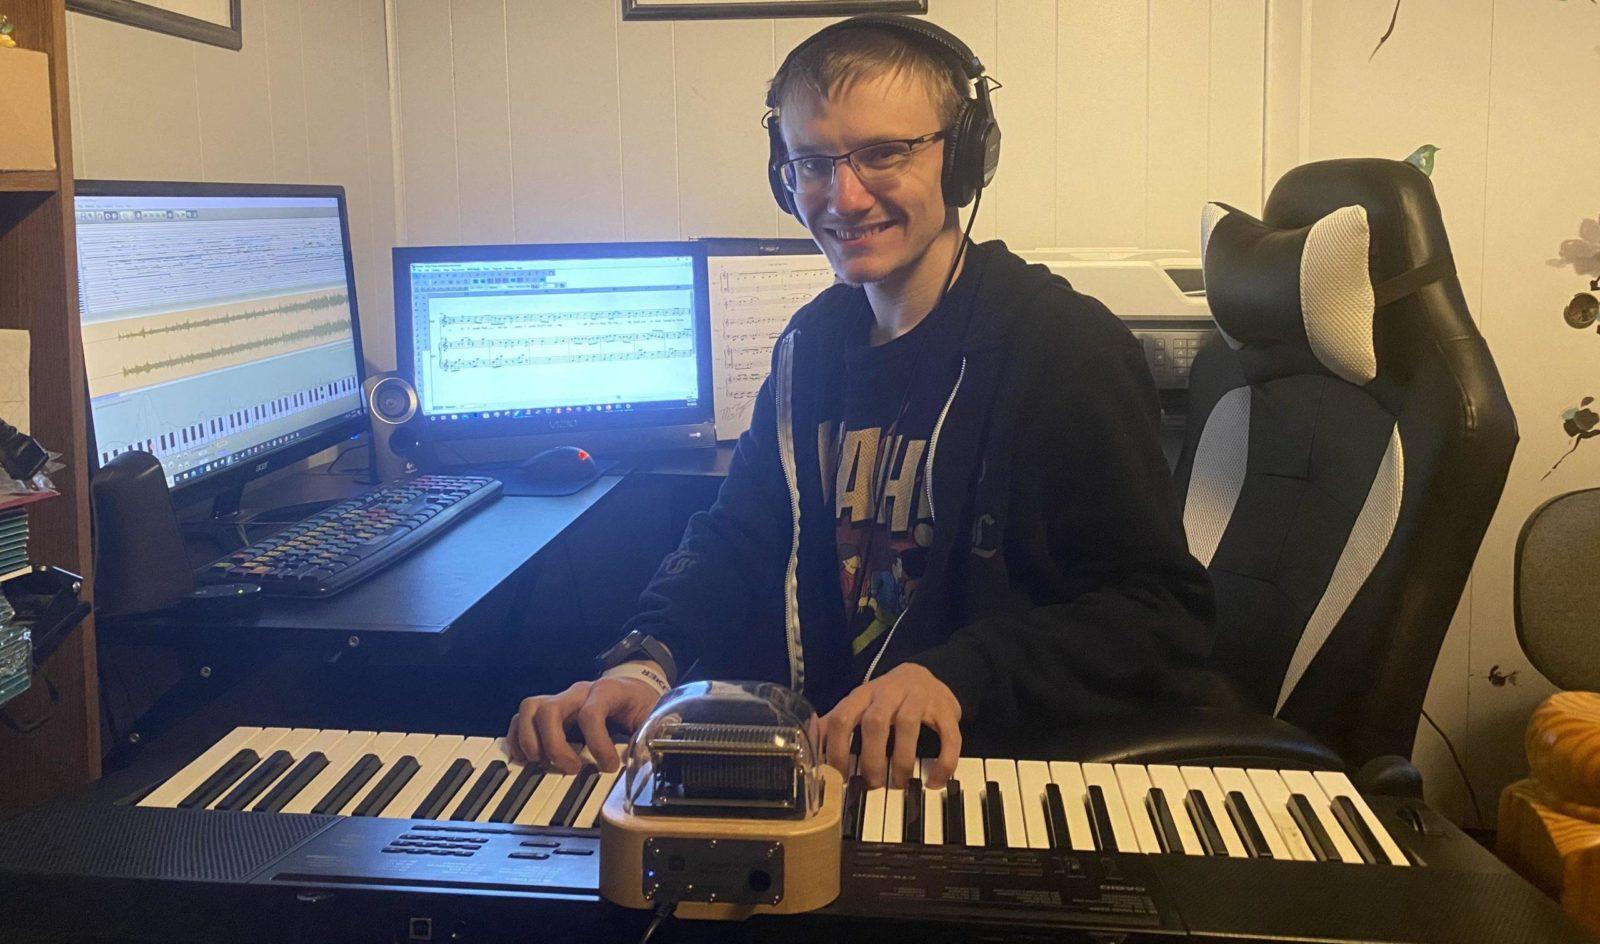 Josh Keeler is playing the programmable music box Muro Box in his studio. and there are a MIDI keyboard and computer next to the Music Box.